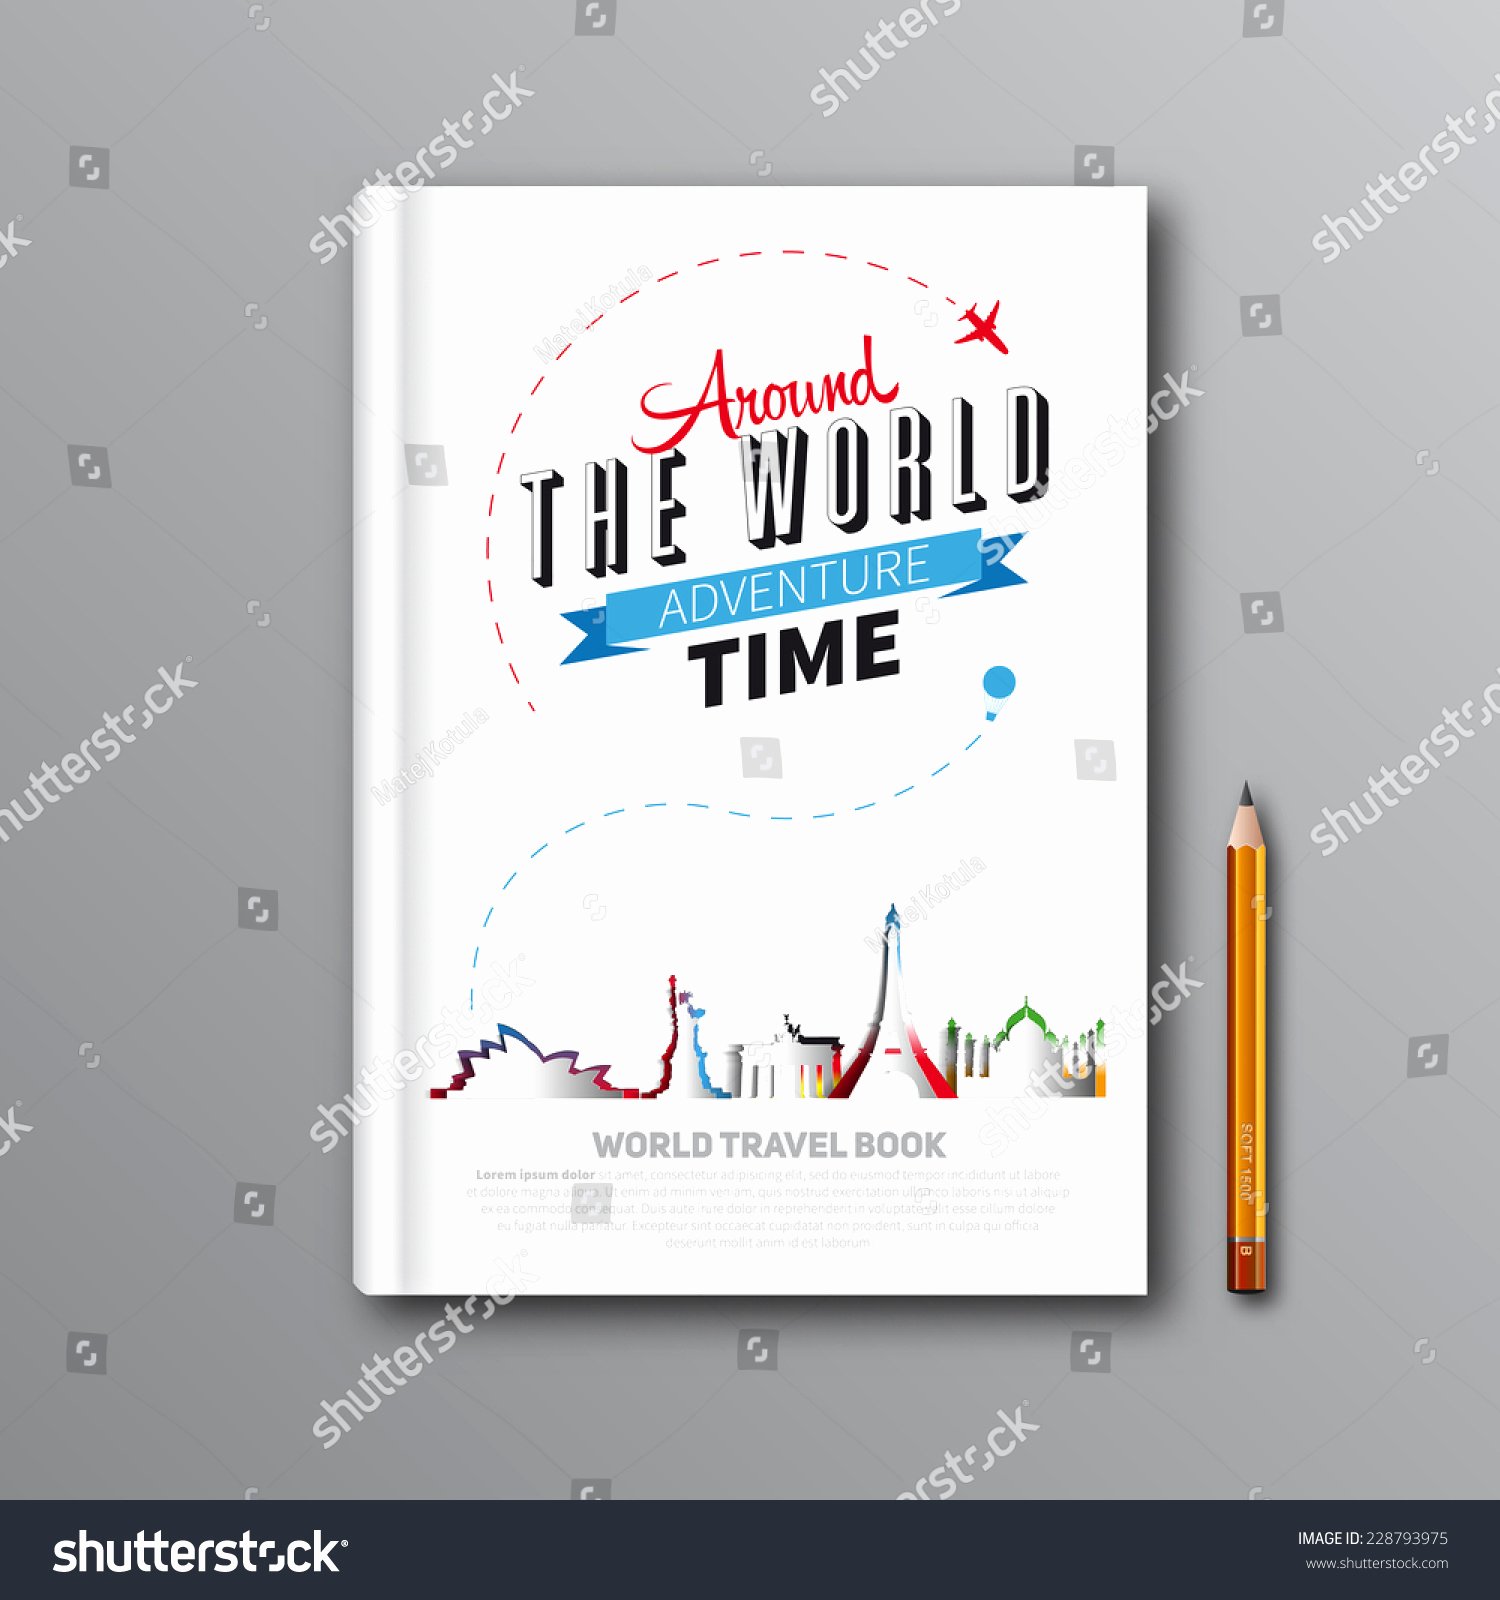 Book Cover Template Illustrator Best Of World Travel Book Template Design Can Stock Vector